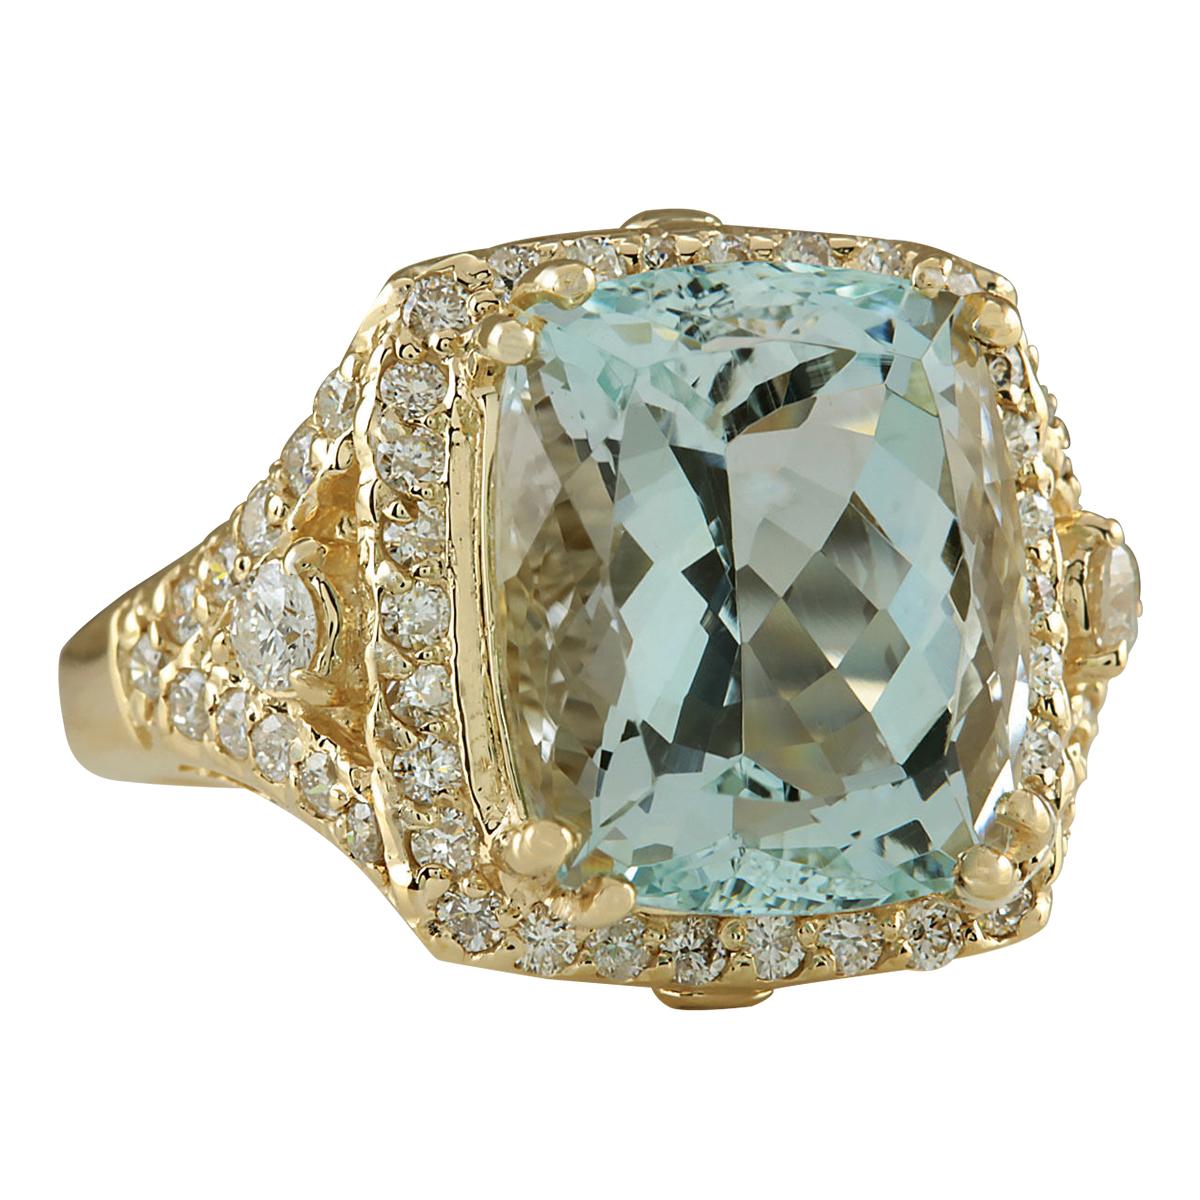 Elevate your style with our exquisite 9.03 Carat Natural Aquamarine Ring, crafted in radiant 14K Yellow Gold. Adorning the center is a mesmerizing aquamarine, weighing 8.03 Carats and measuring 12.00x10.00 mm. Accentuating its allure are sparkling